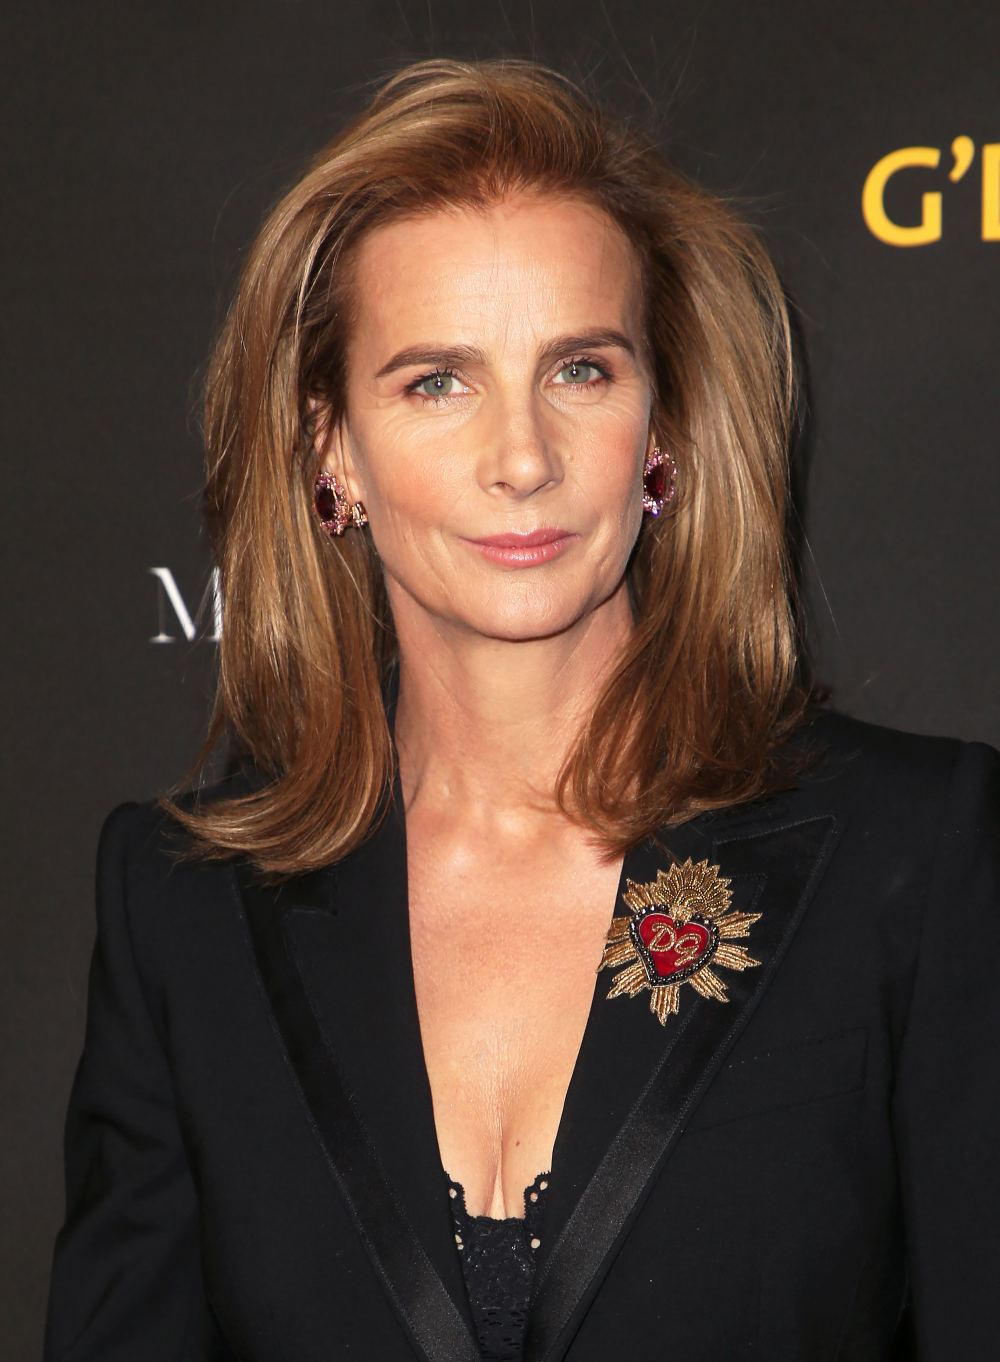 Rachel Griffiths Apologies for Flaunting Manicure as 'People Are Dying'